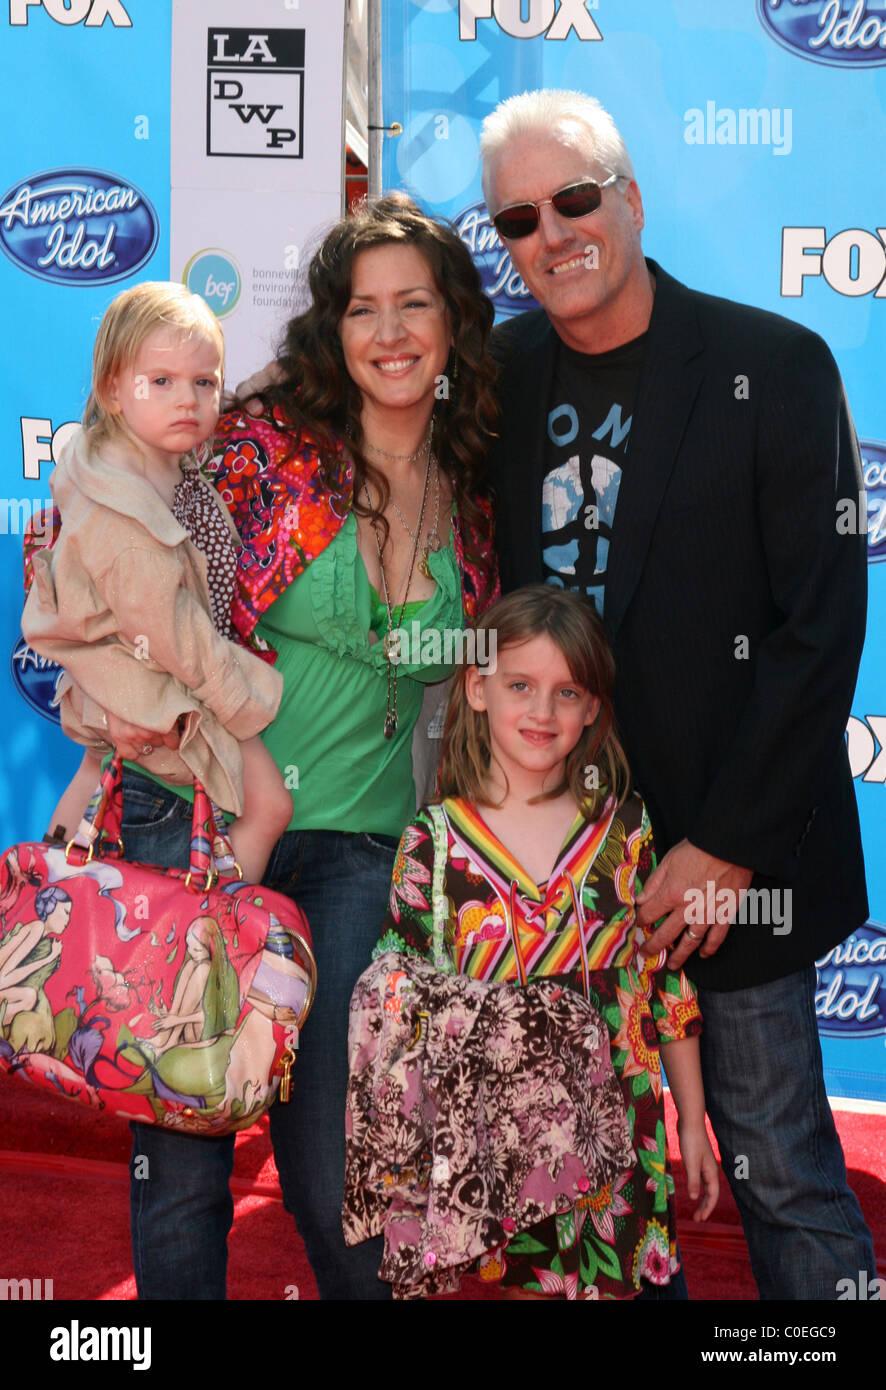 Joely Fisher and family Arrivals at the 'American Idol 2008' finale. Los Angeles, California - 21.05.08 Stock Photo